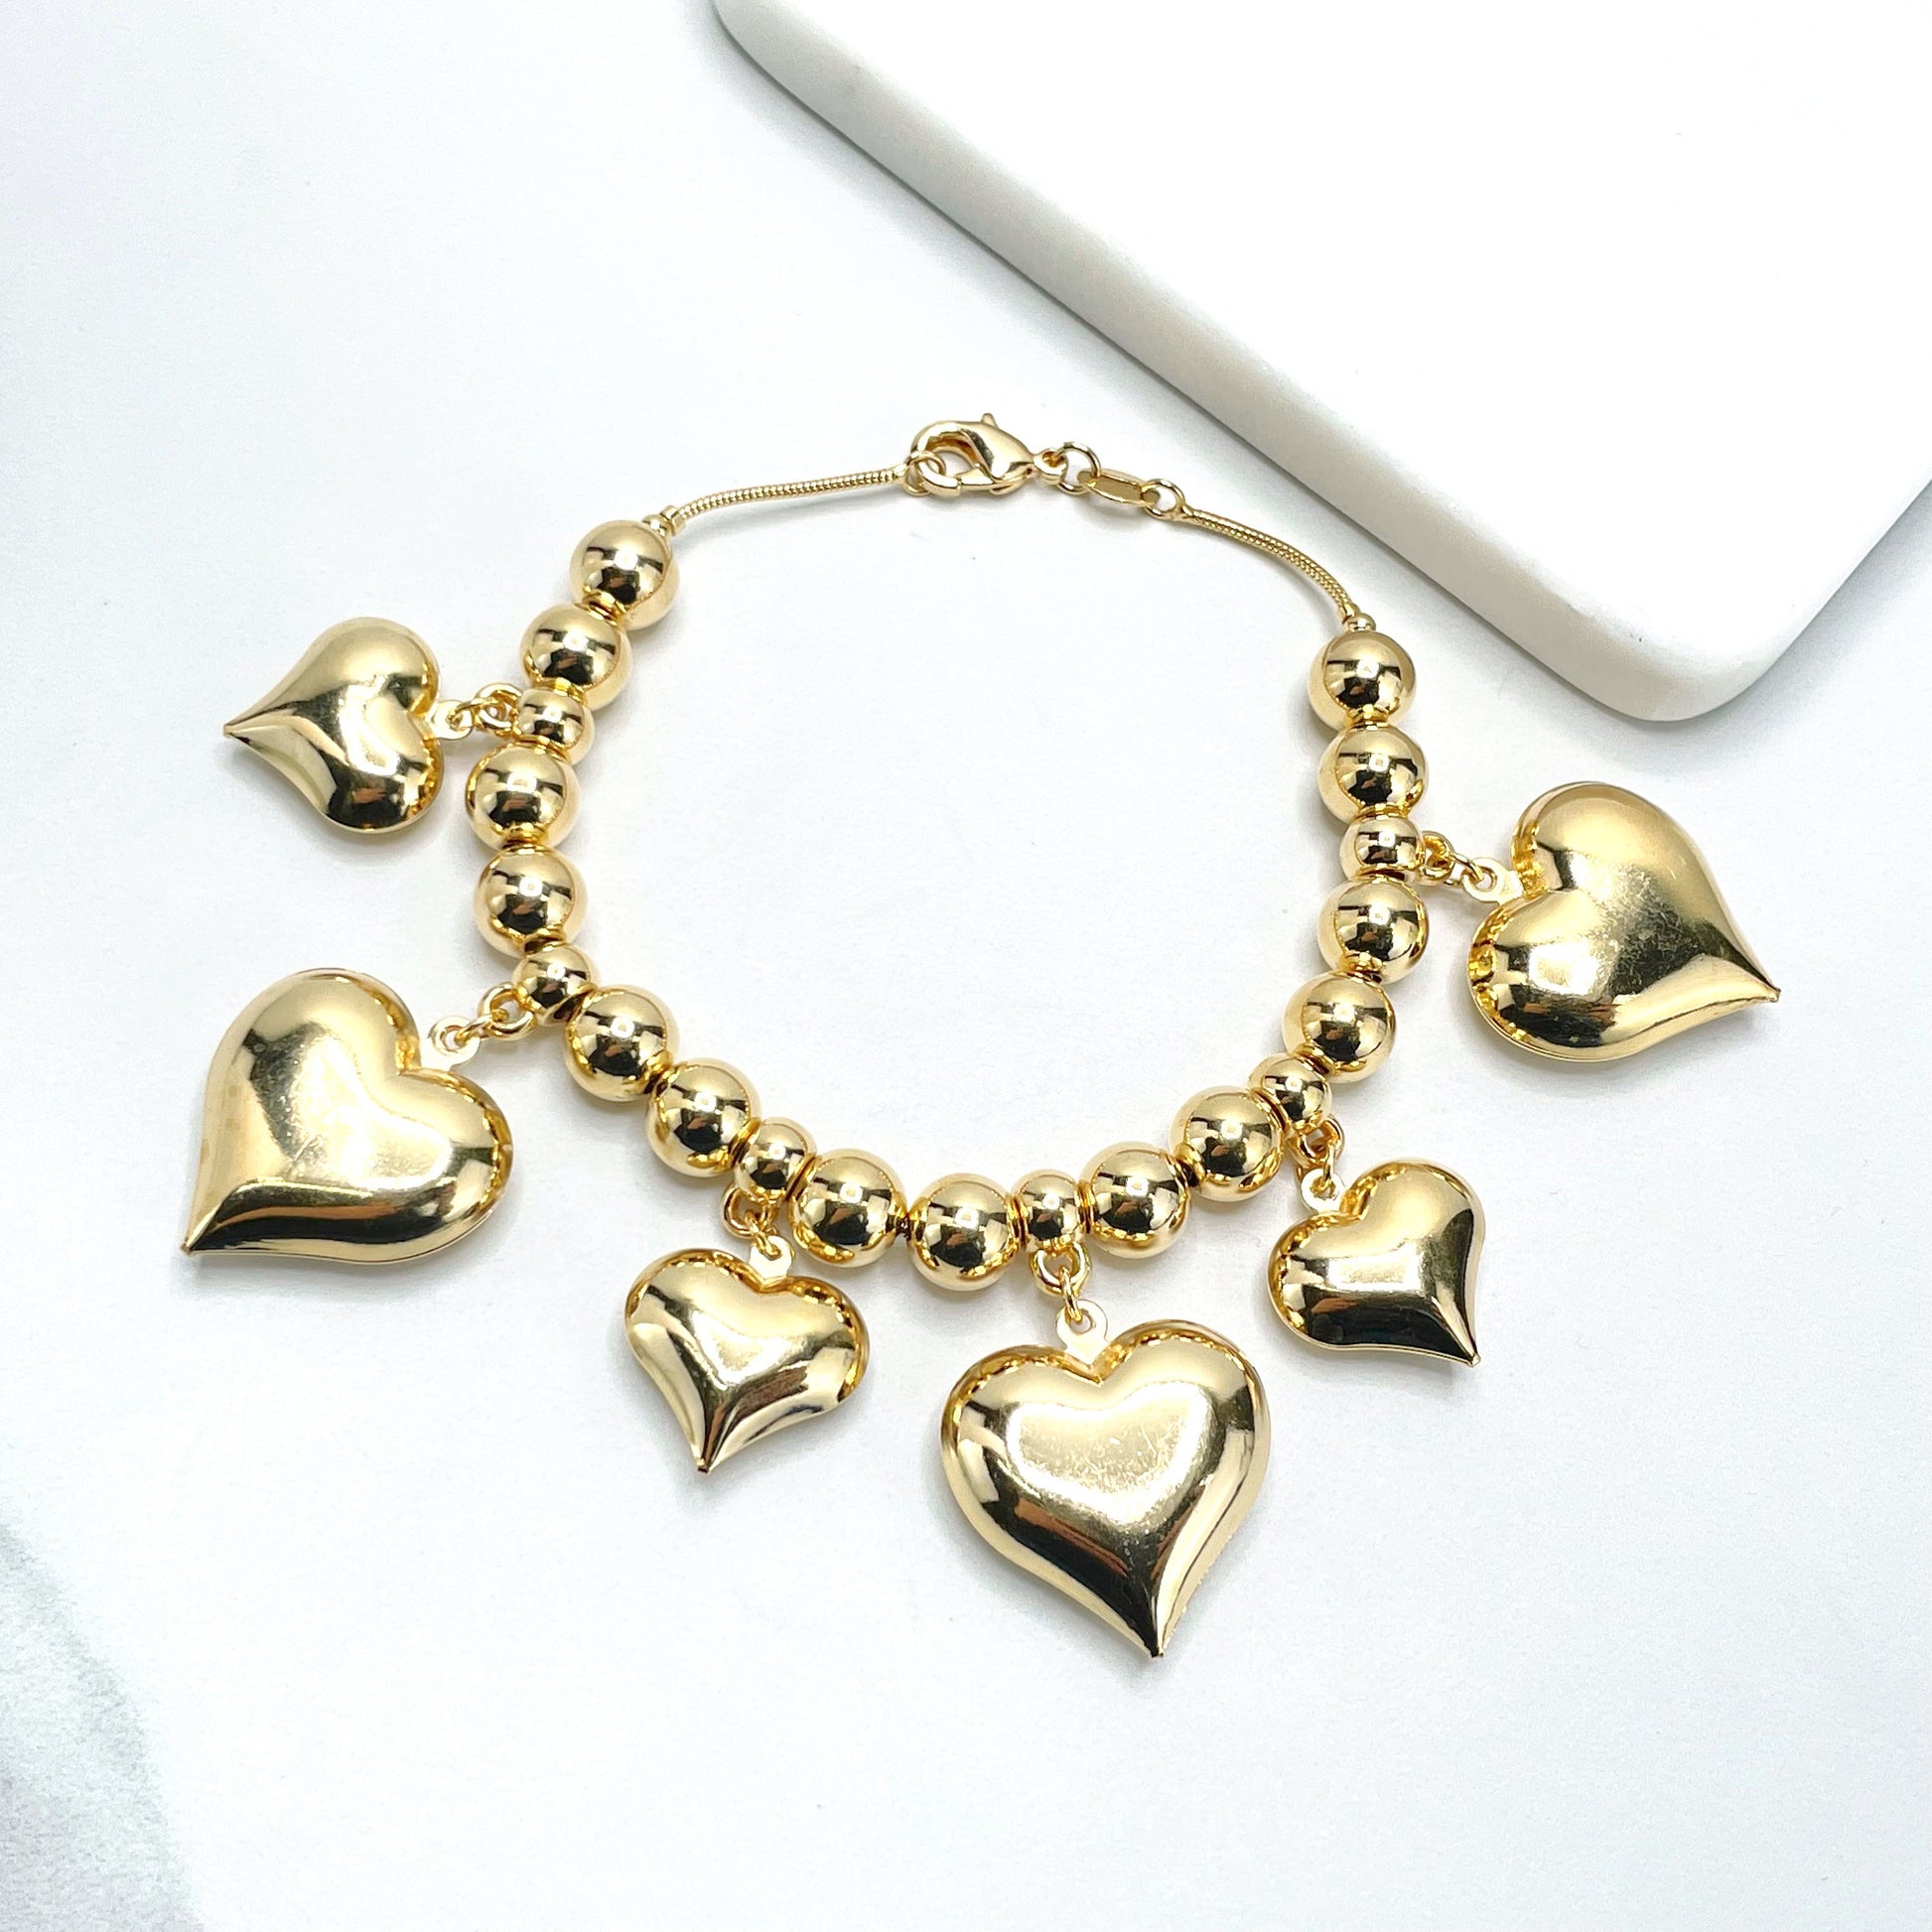 Wholesales Beads - Hearted Charm